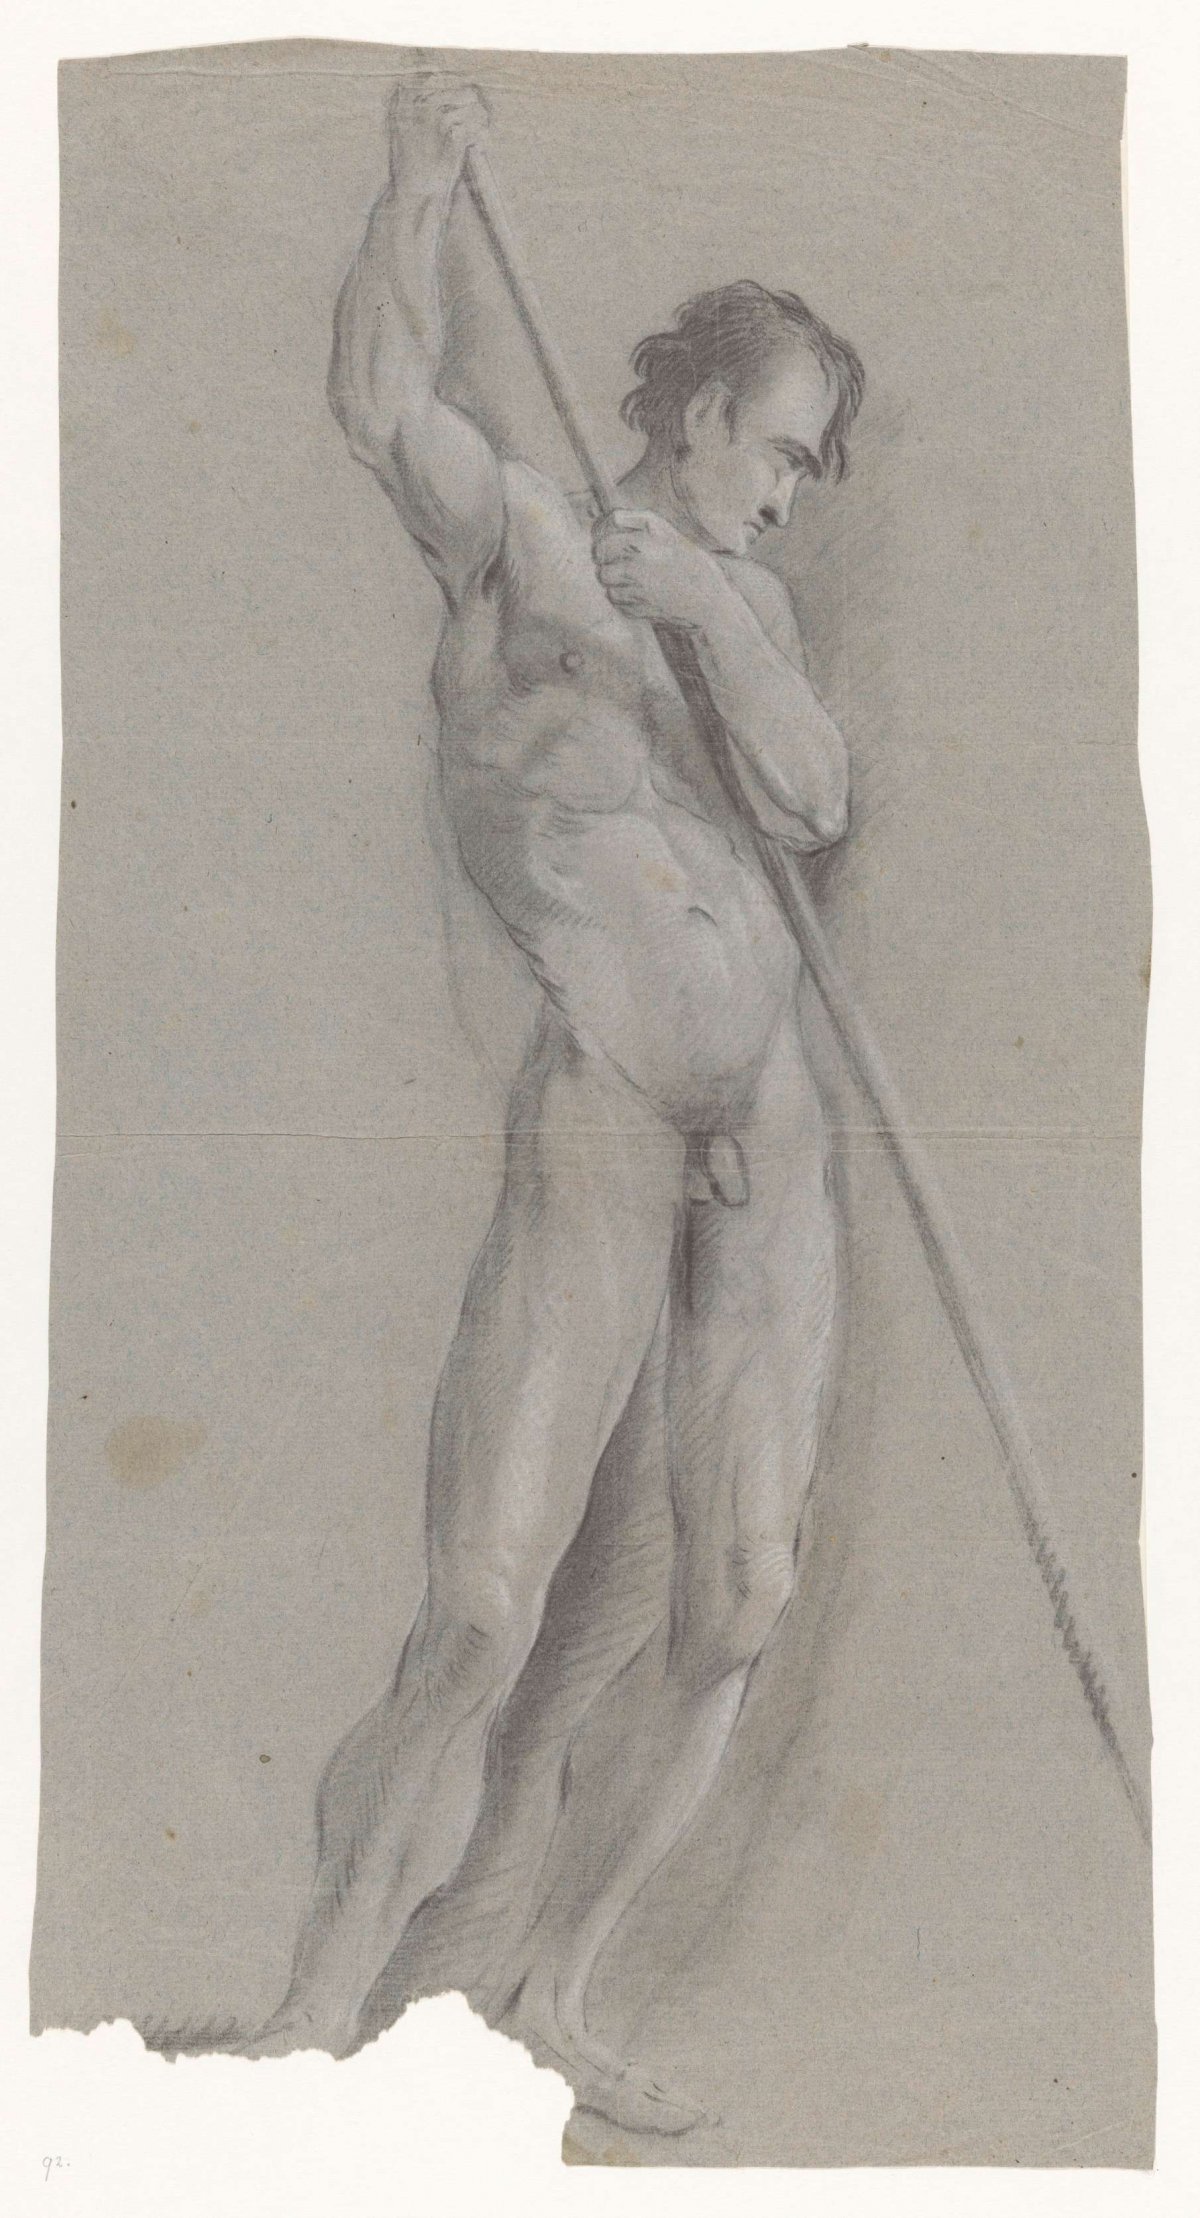 Naked man with cane, Jan Brandes, 1787 - 1808